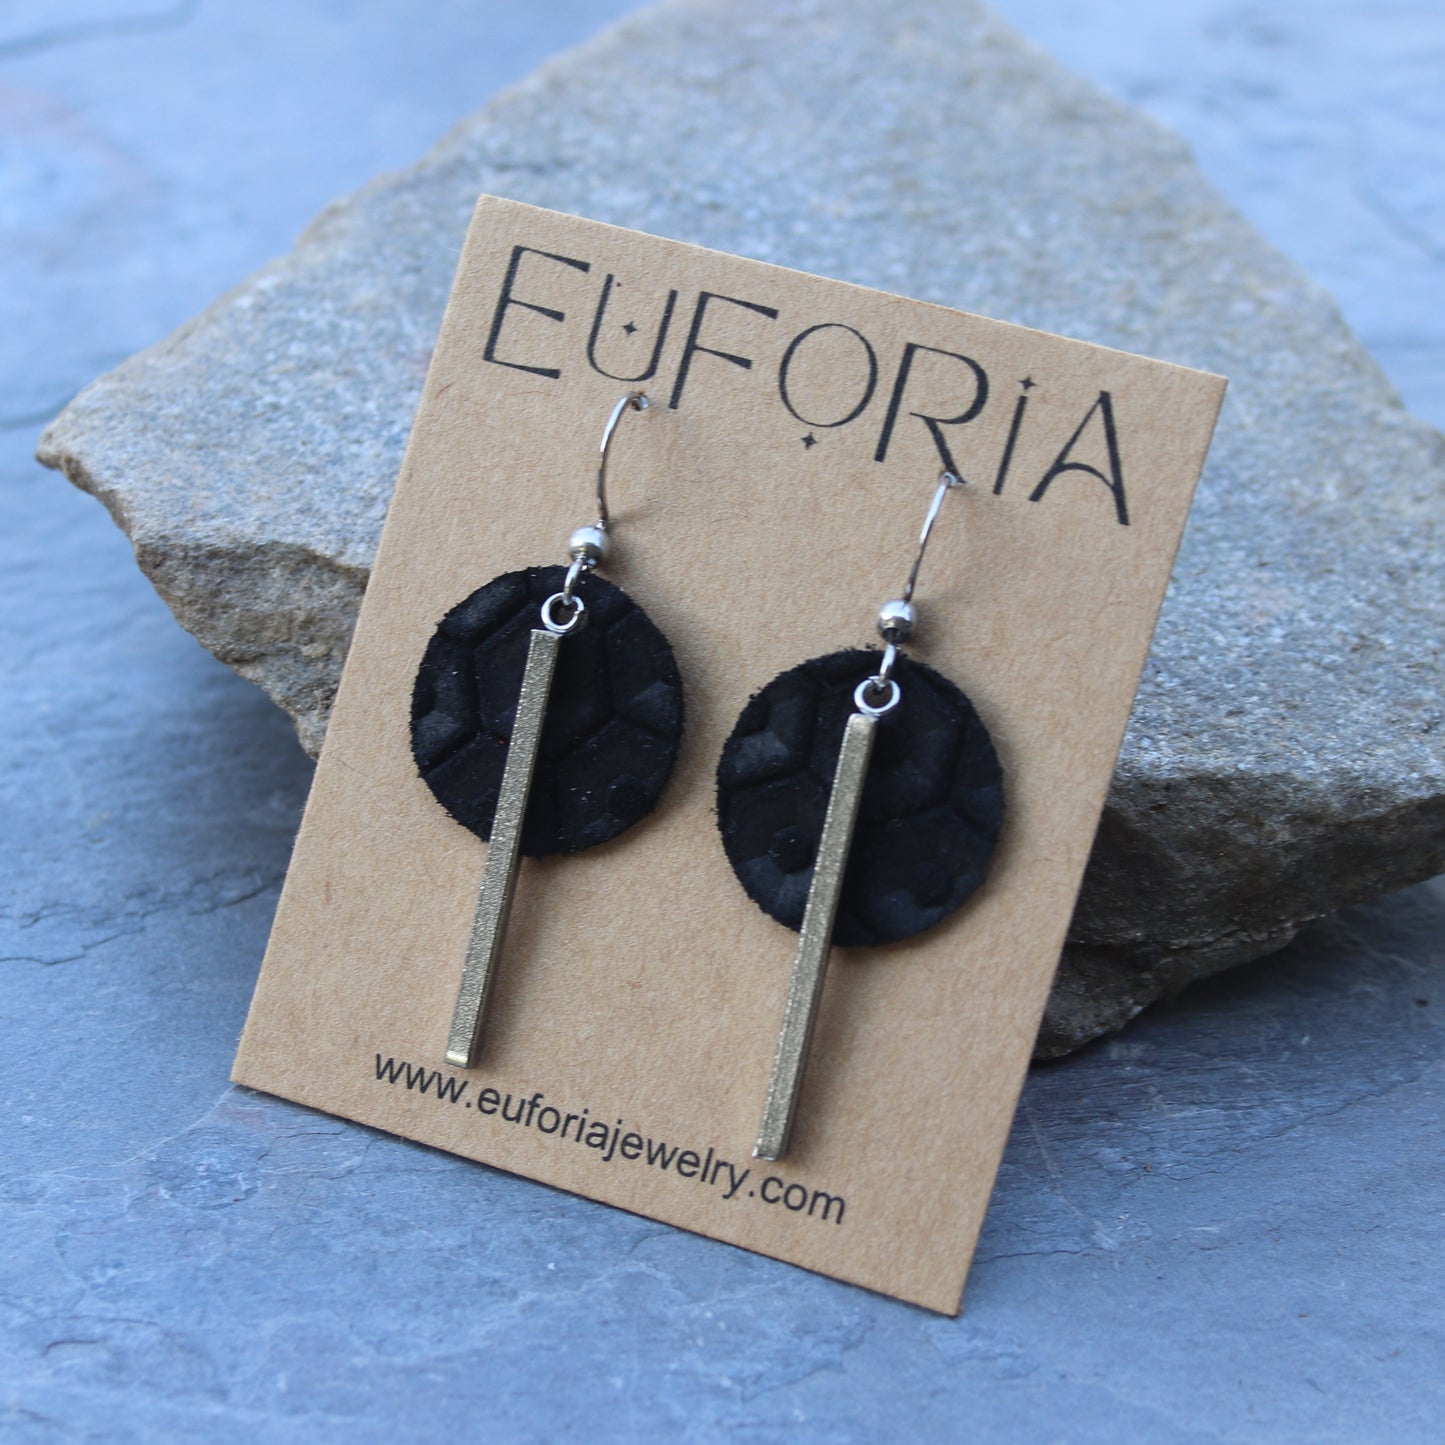 .75" black leather circles with 1.5" stainless steel bar charm overlaid. 2" total length dangle earrings.